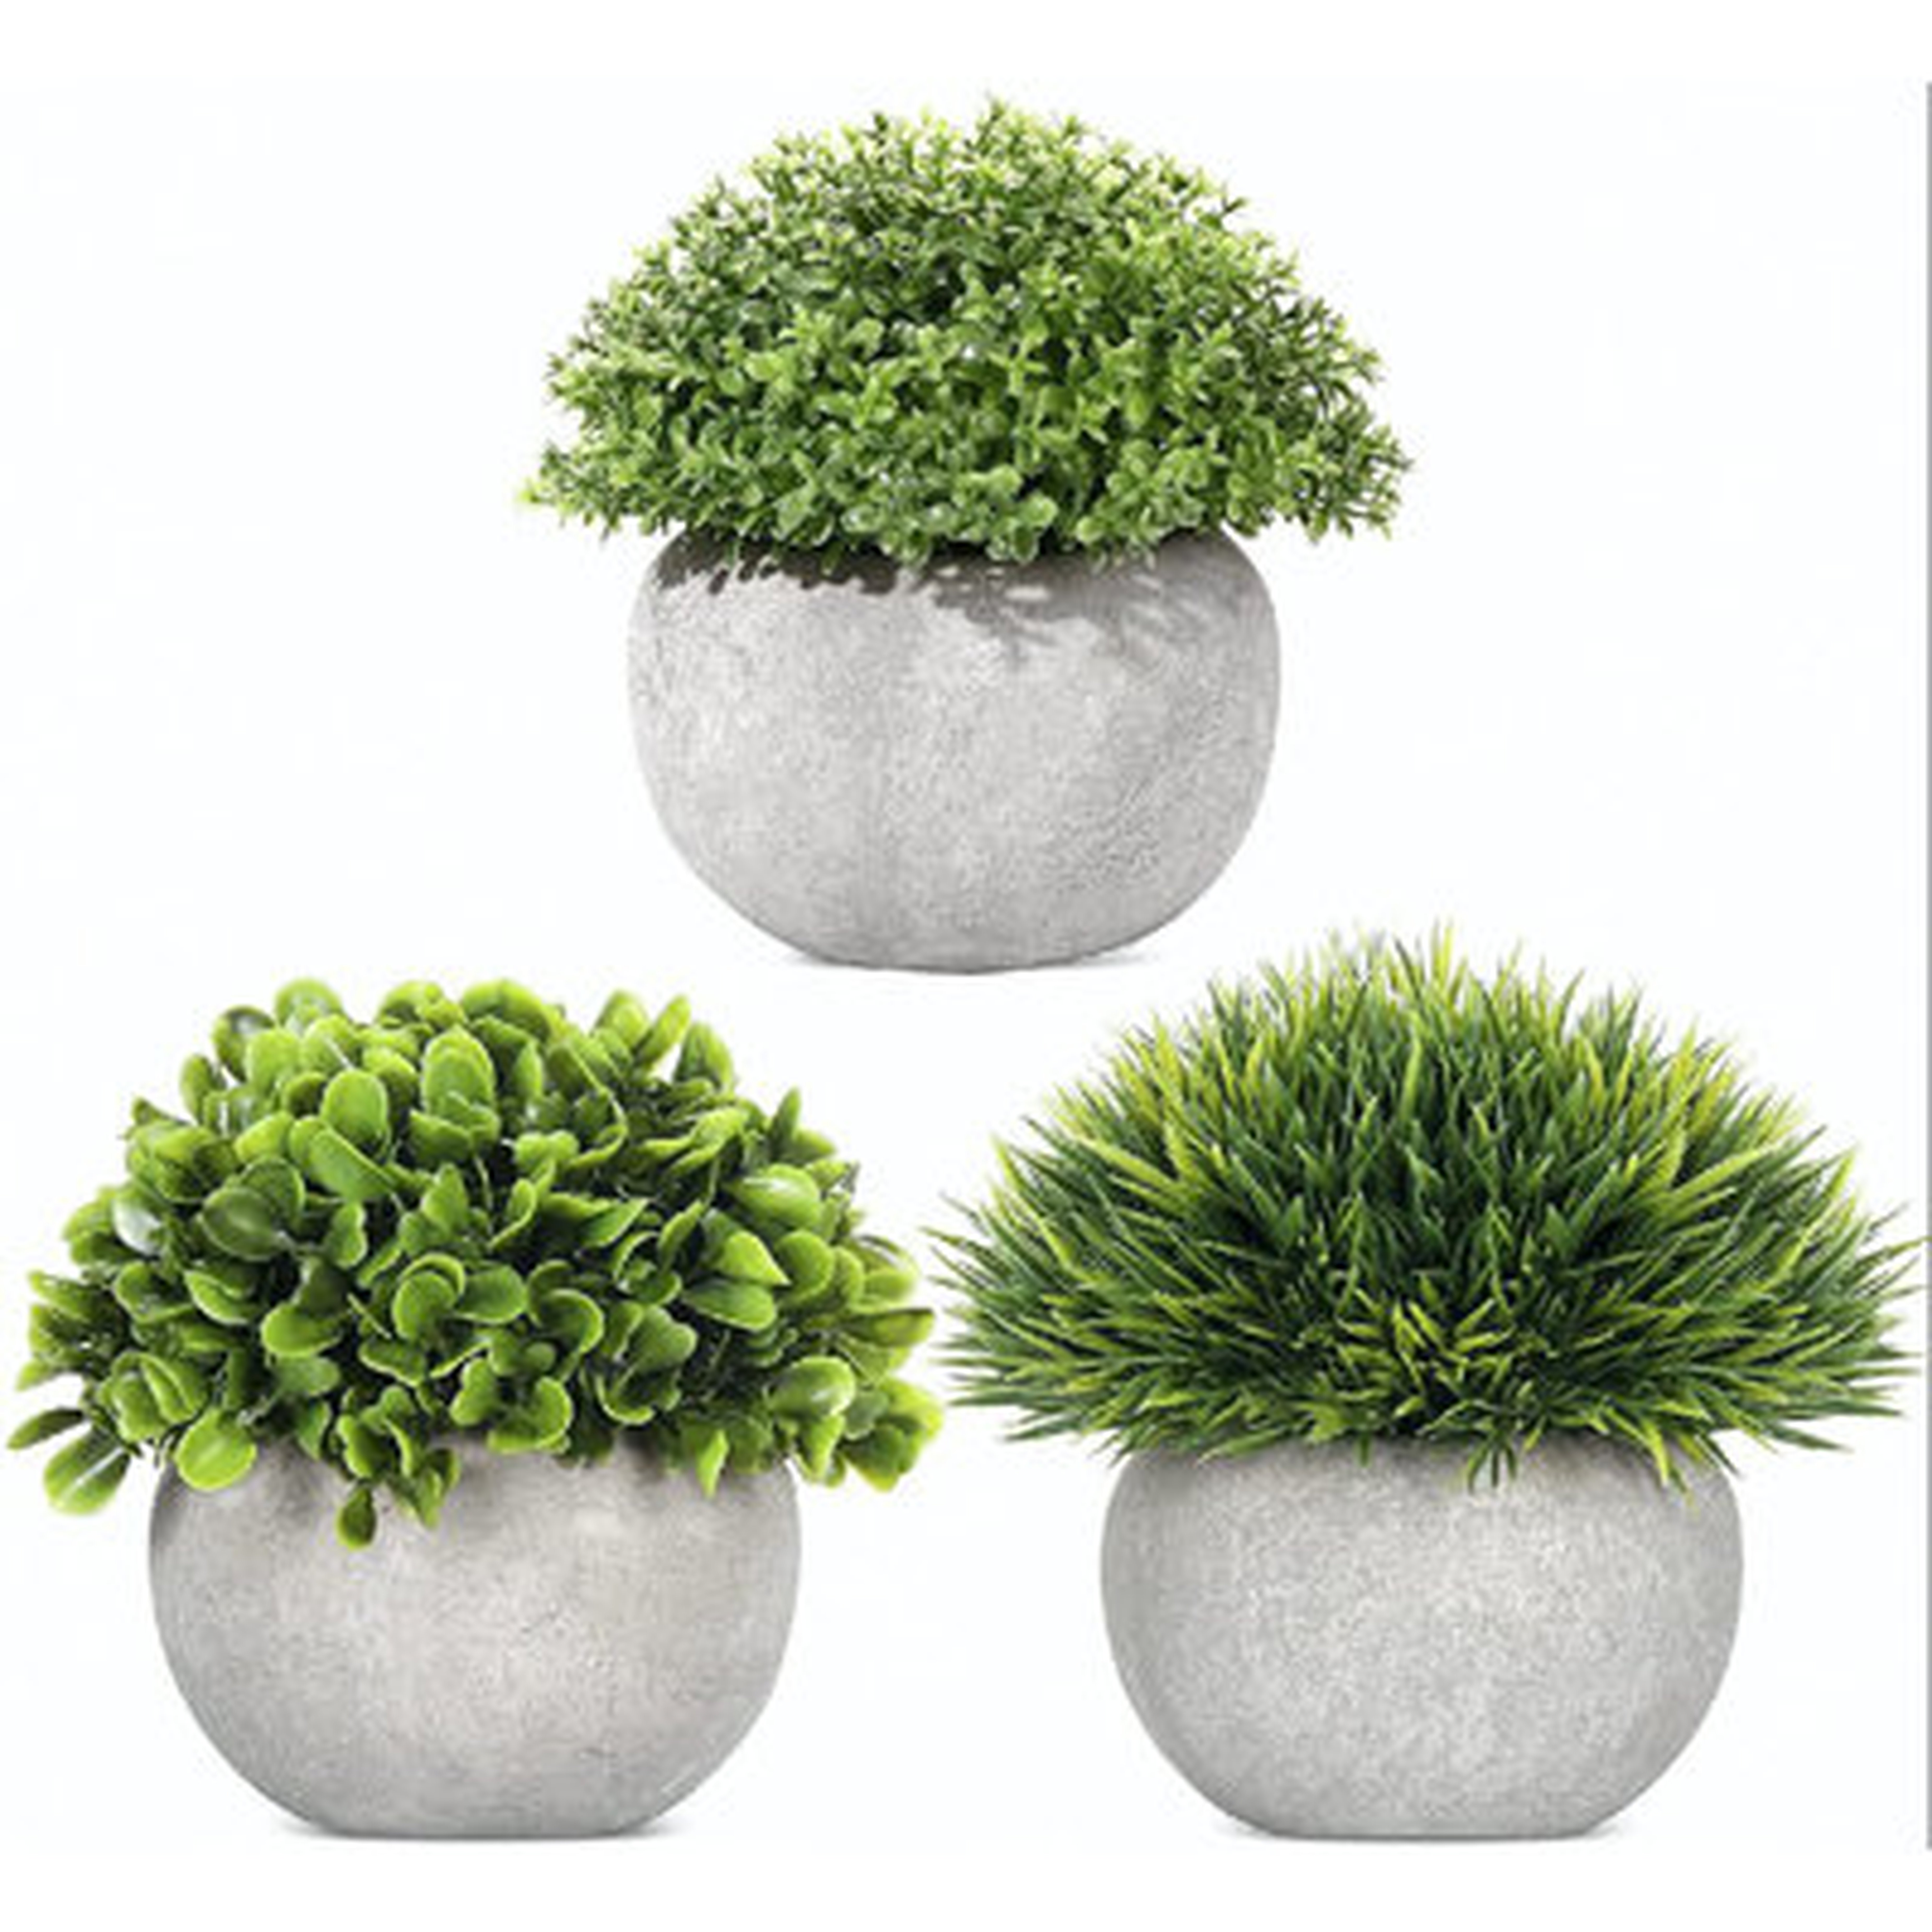 Mini Artificial Plants Potted Faux Topiary Shrubs Greenery Grass Decor Small Fake Plants With Creamic Pots For Bathroom Home Office Desk Room House Decorations Living Room - Wayfair